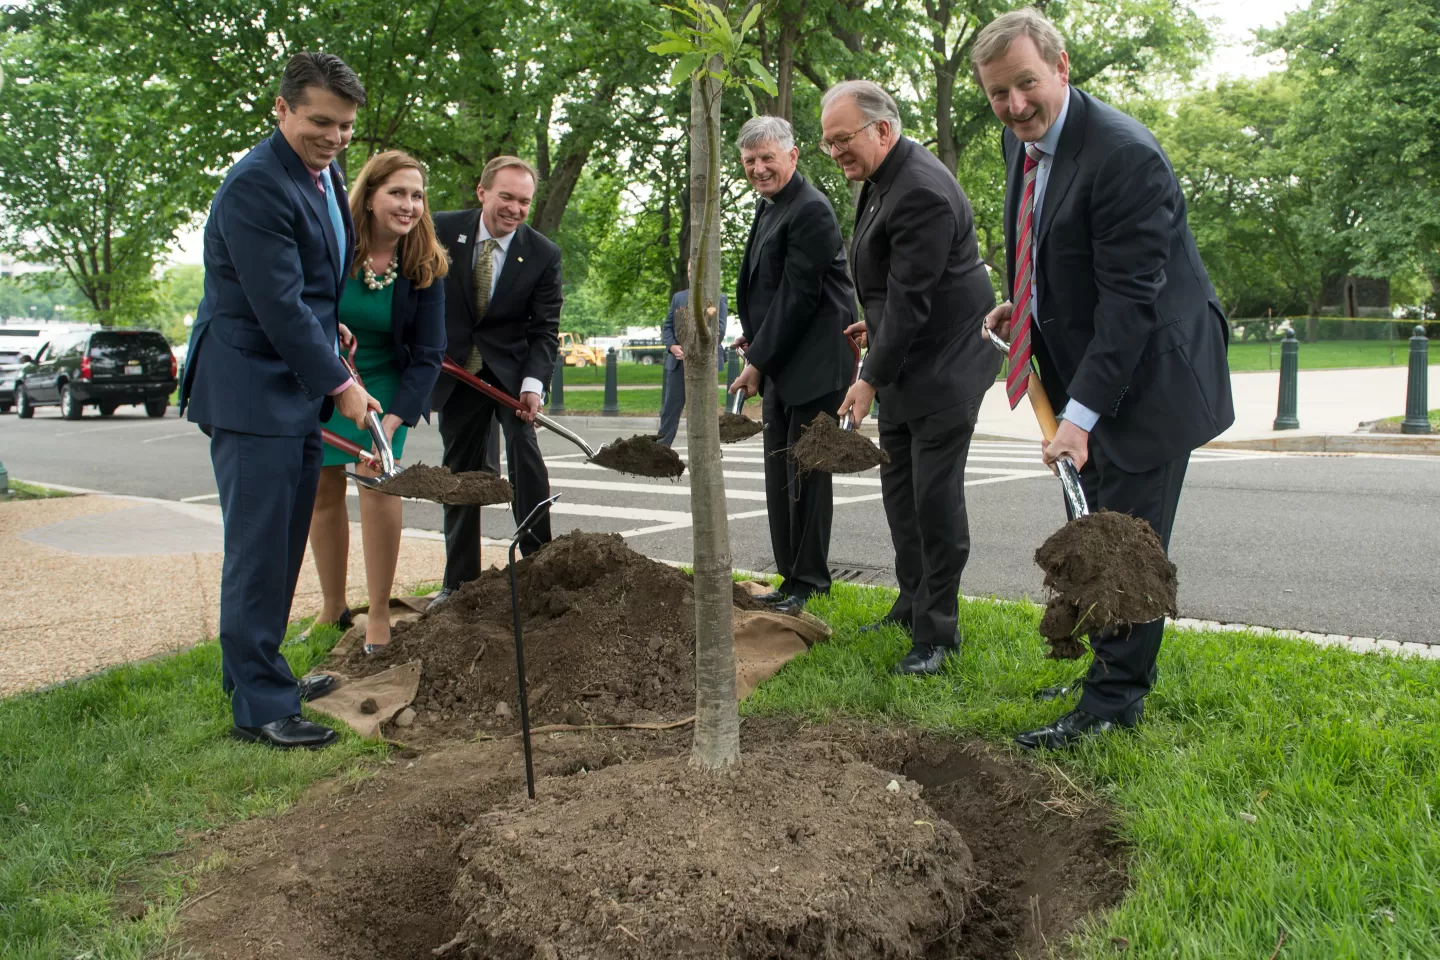 Planting of the 100th Anniversary of Ireland's 1916 Easter Rising Tree on May 18, 2016.